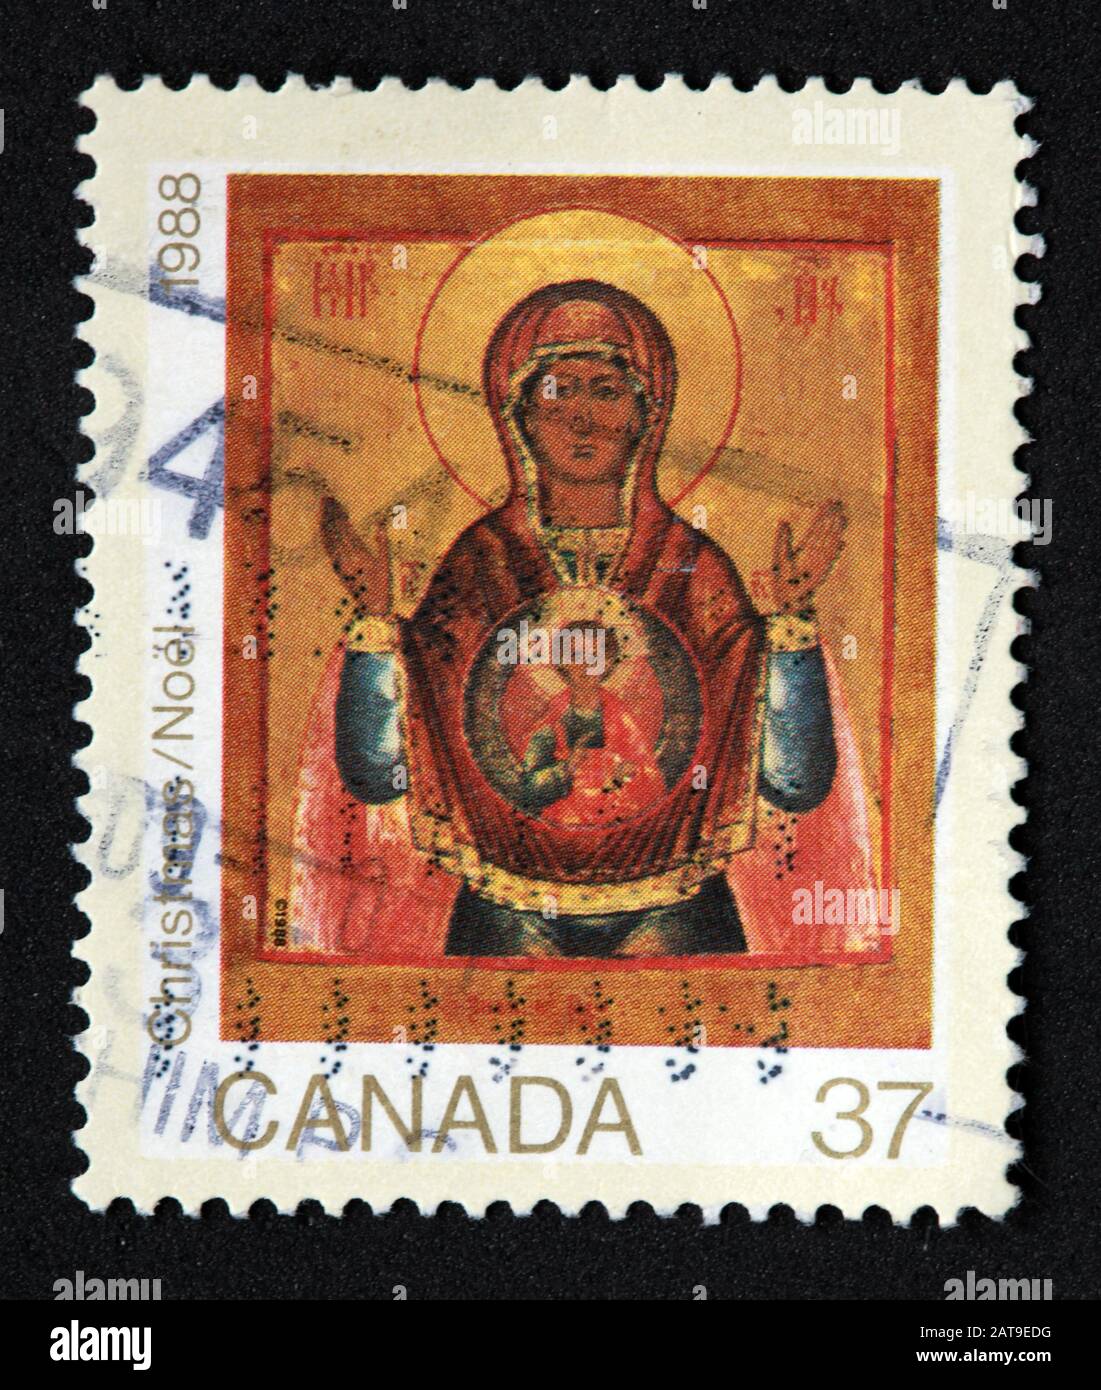 Canadian Stamp, Canada Stamp, Canada Post,used stamp, Canada 37c Christmas, Xmas, 1988 , angel,Christ, stamp Stock Photo